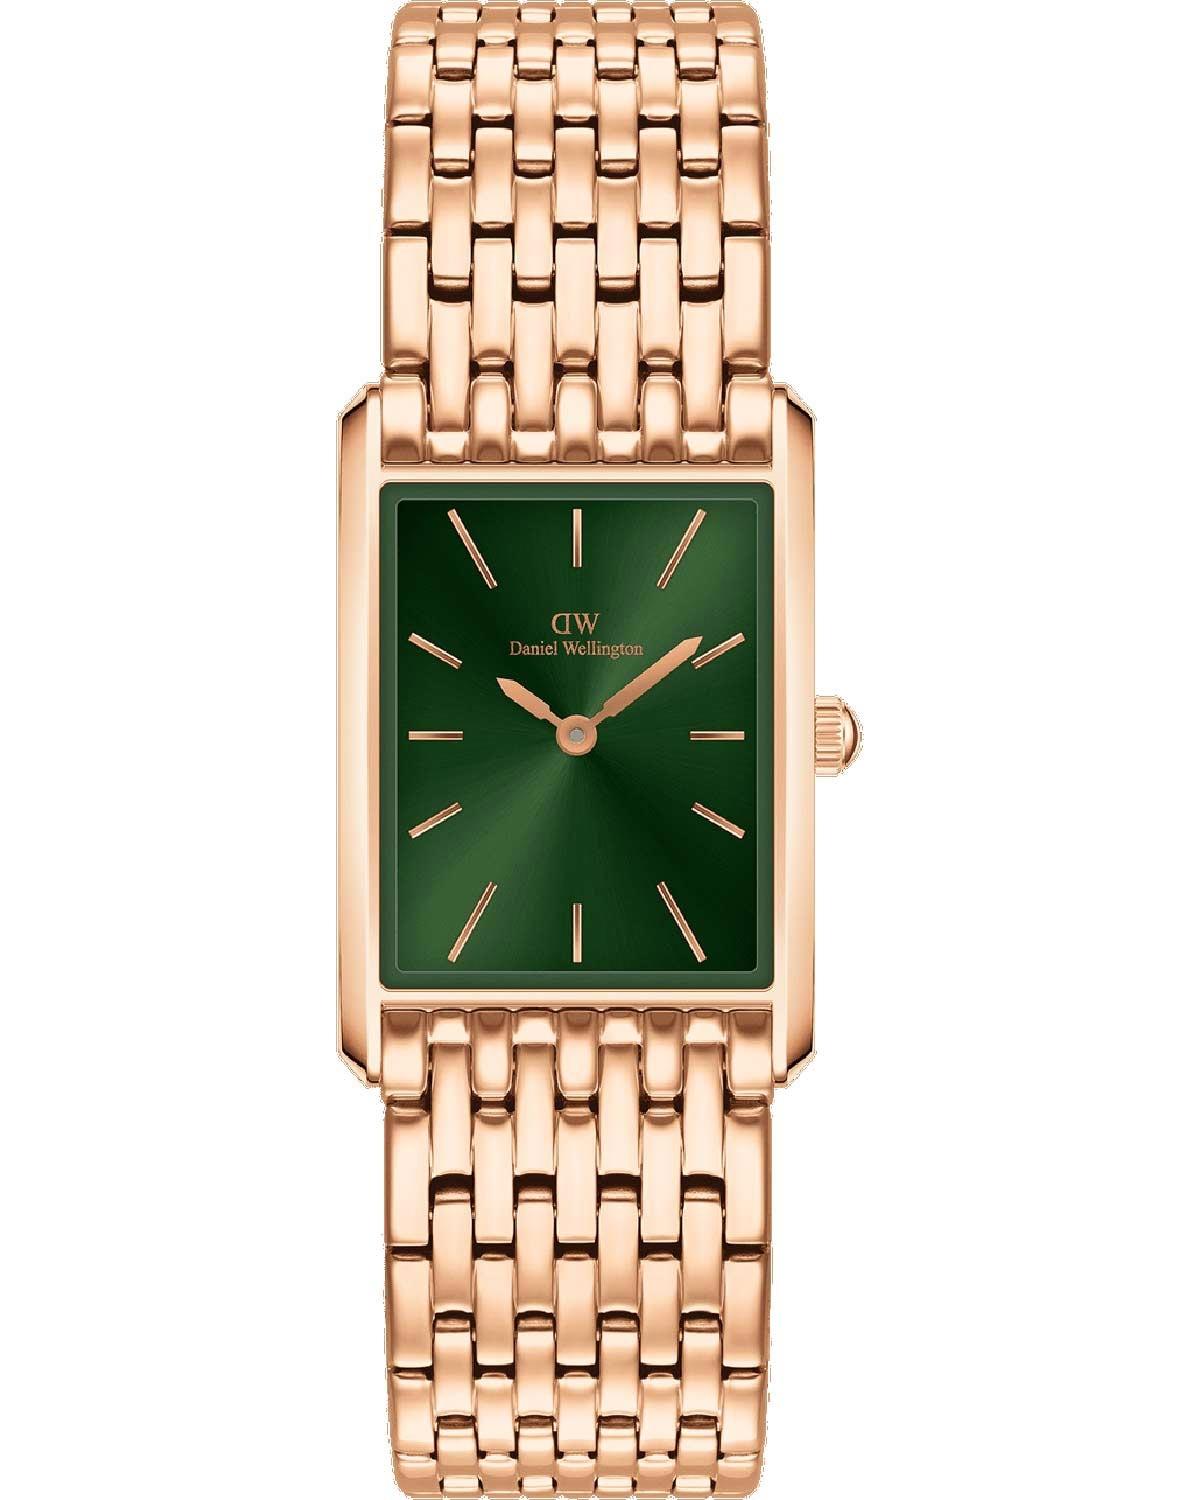 DANIEL WELLINGTON Bound 9-Link Emerald Sunray - DW00100704, Rose Gold case with Stainless Steel Bracelet